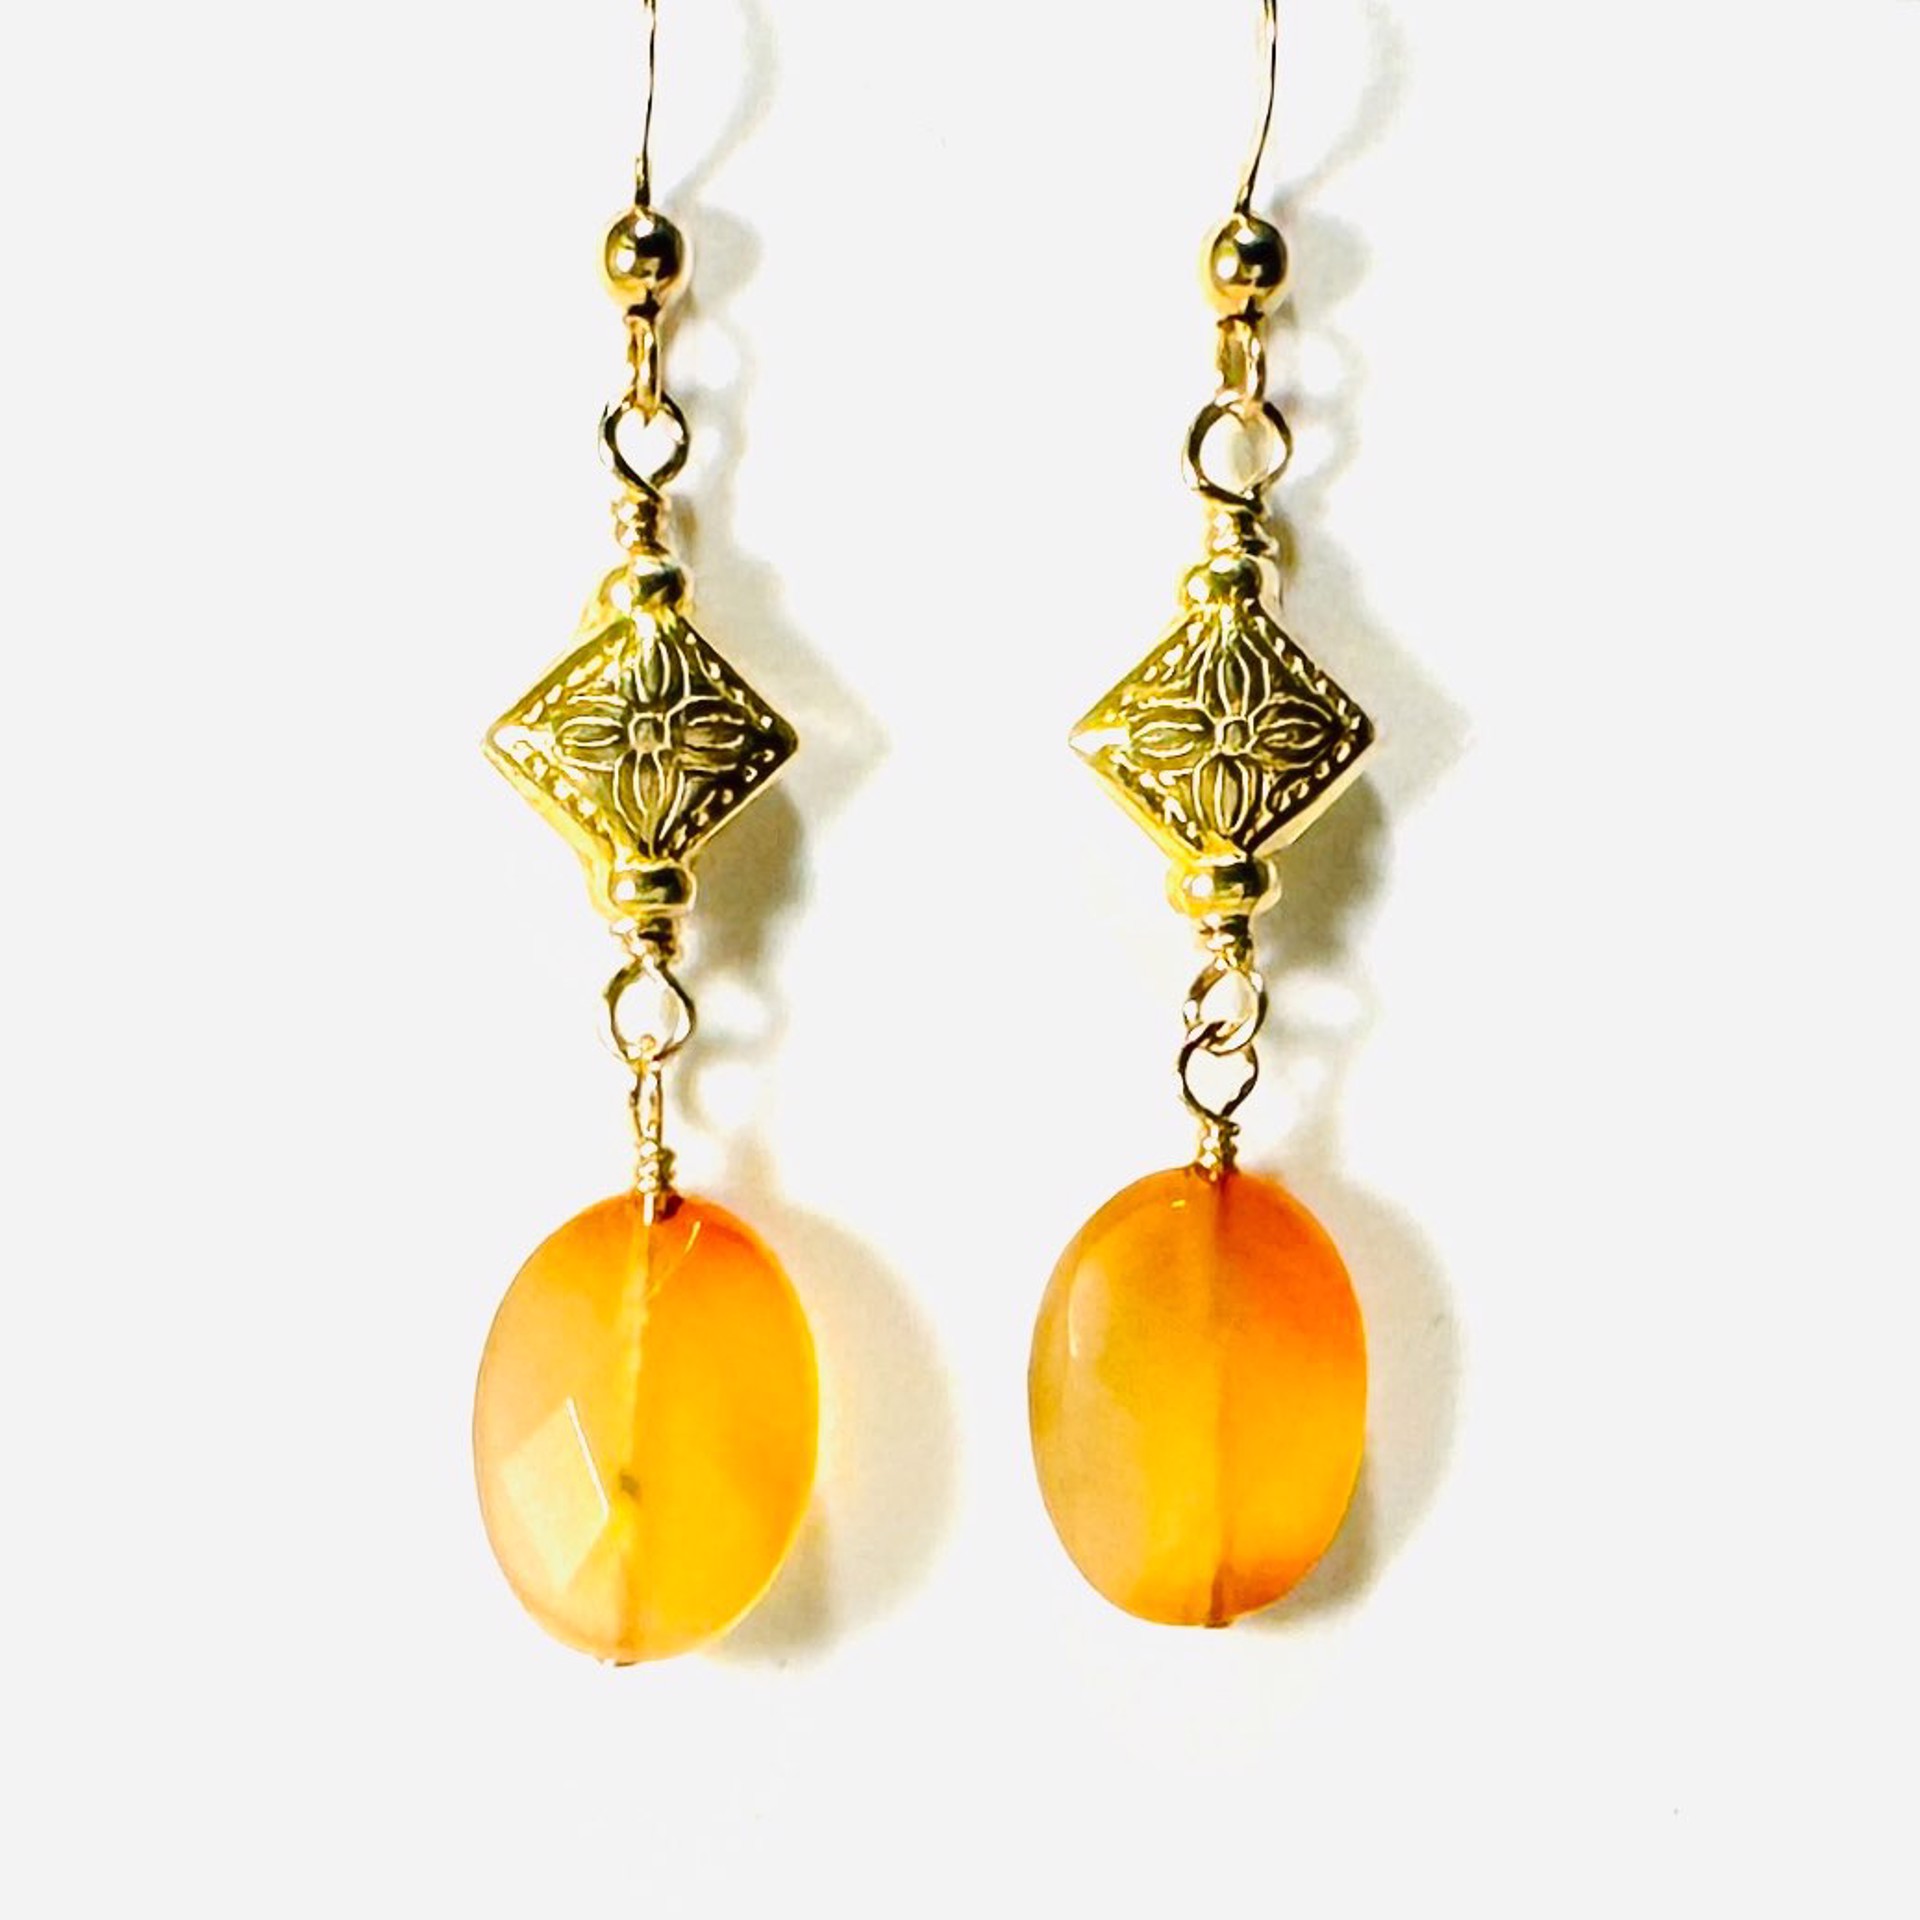 Faceted Carnelian, GF Bead Earrings LR24-20 by Legare Riano